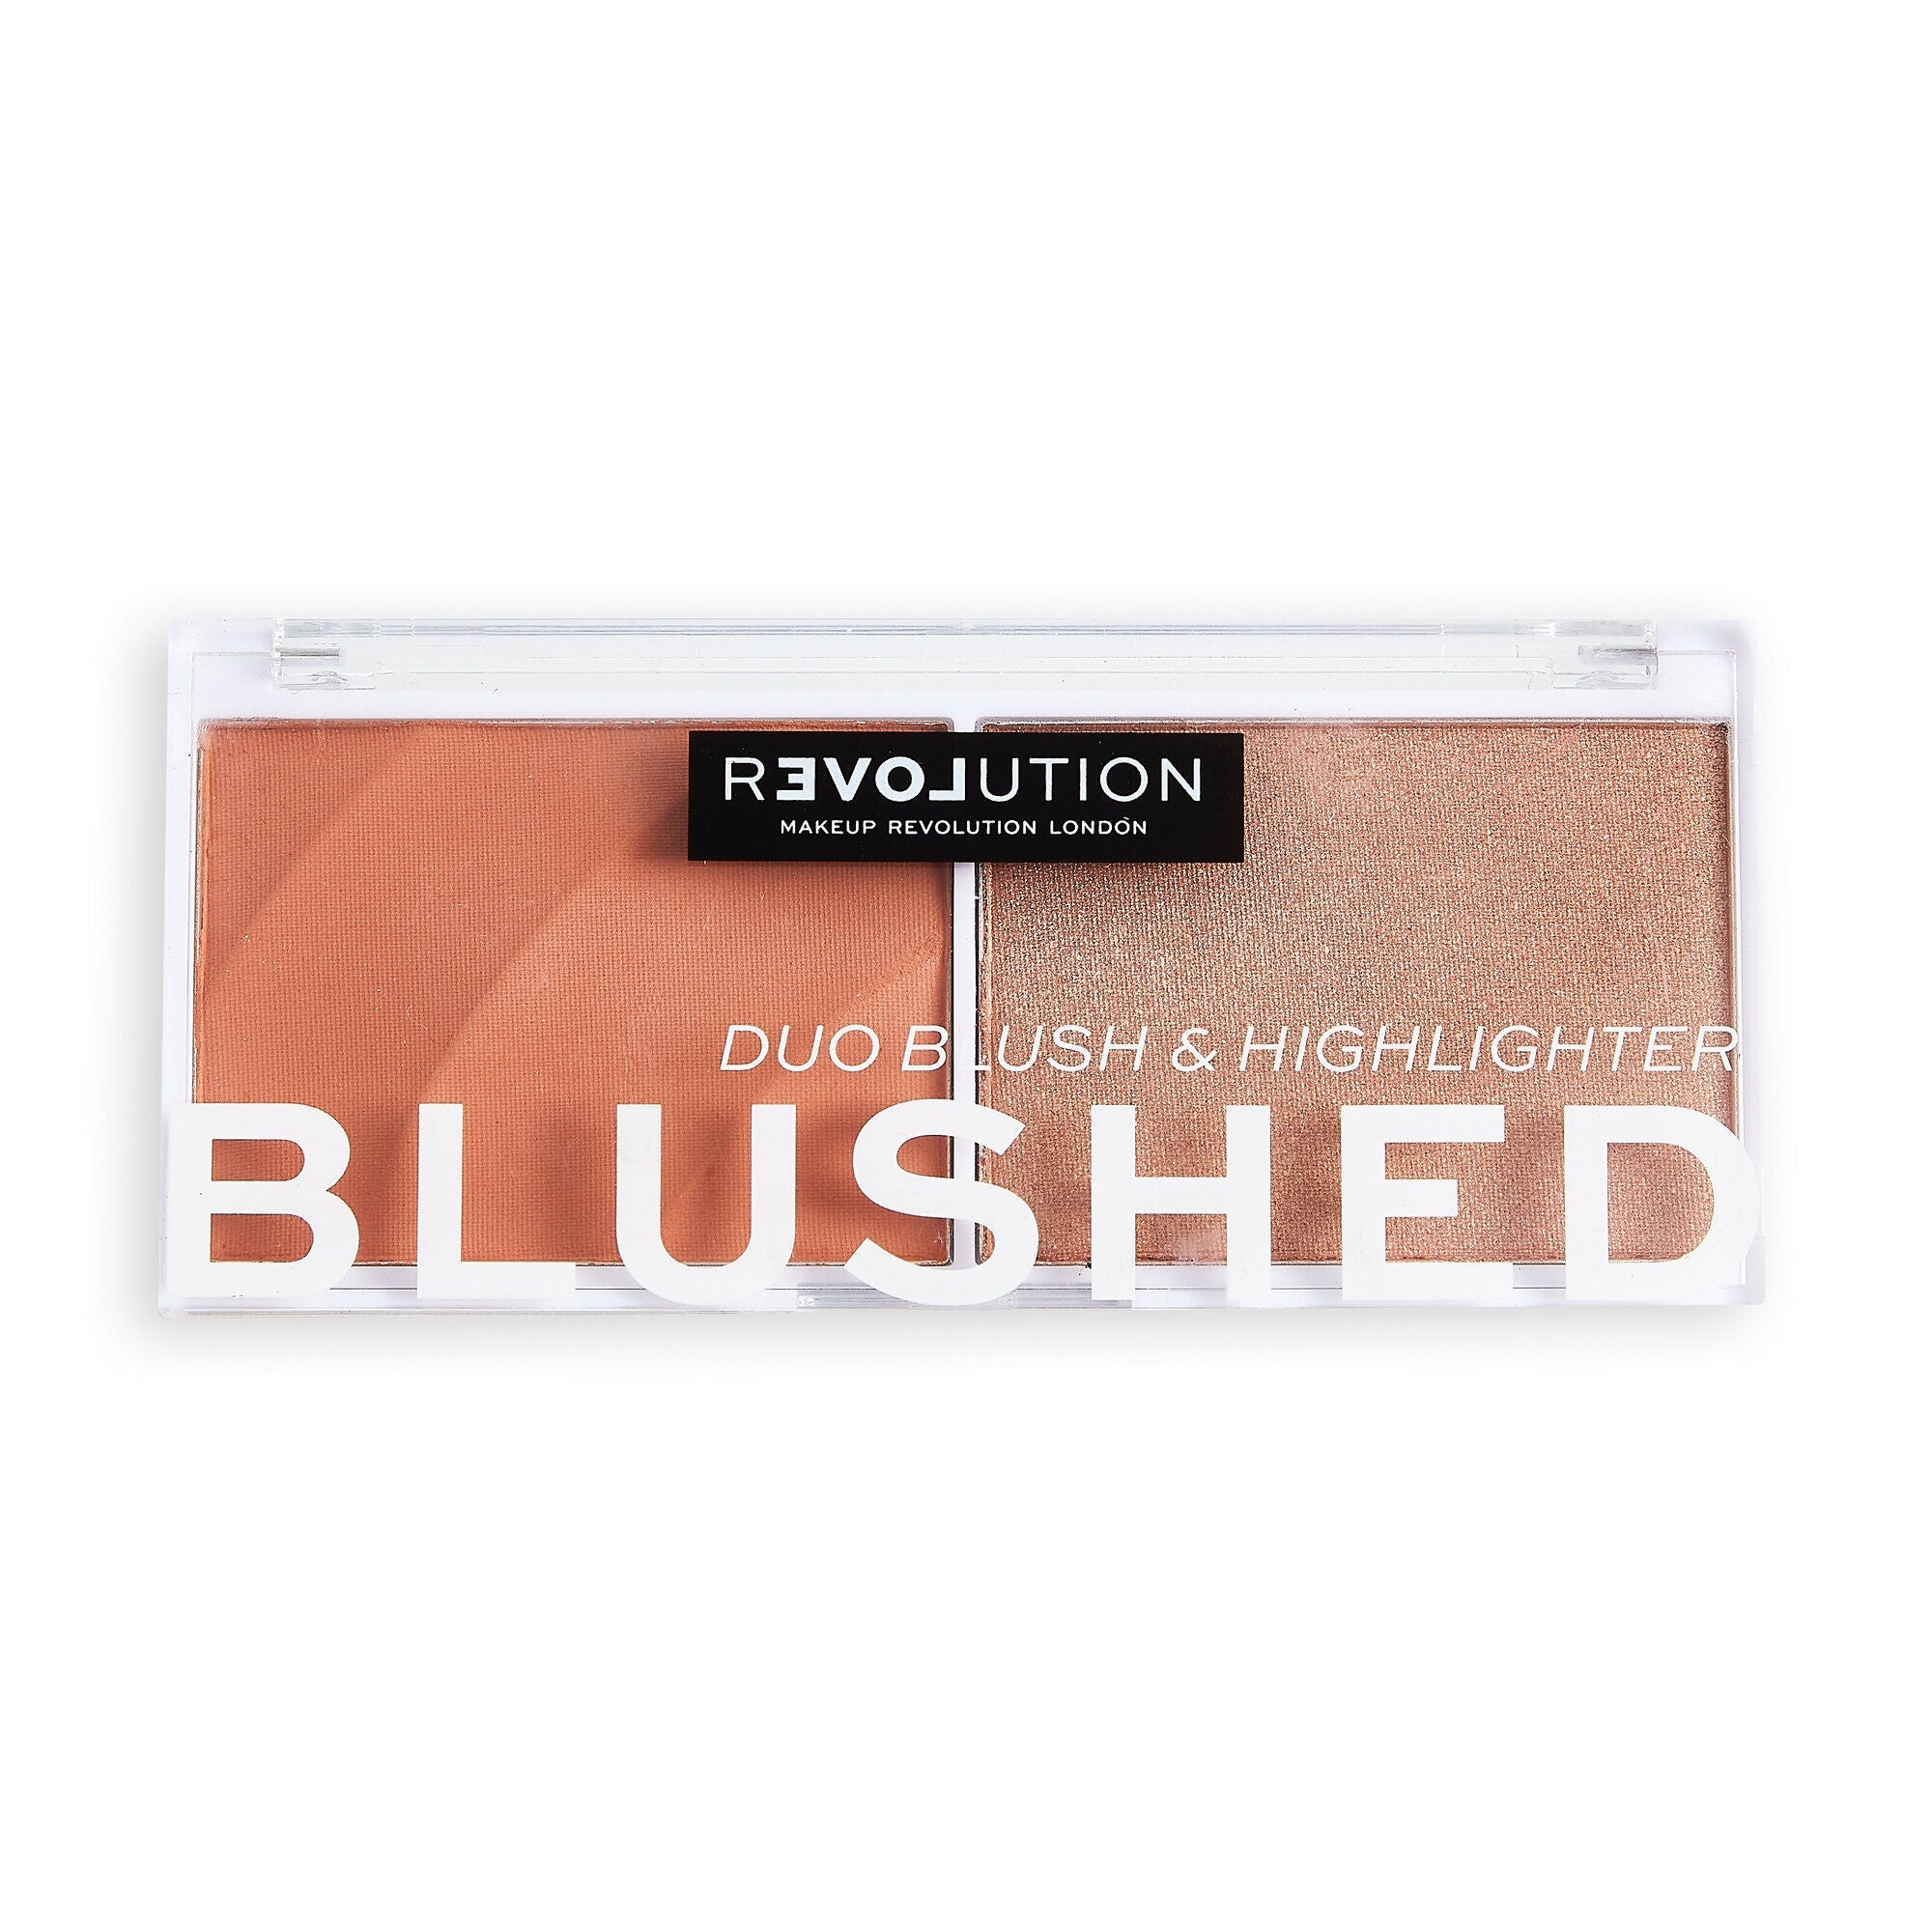 Relove By Revolution 'Colour Play Blushed Duo | Queen'